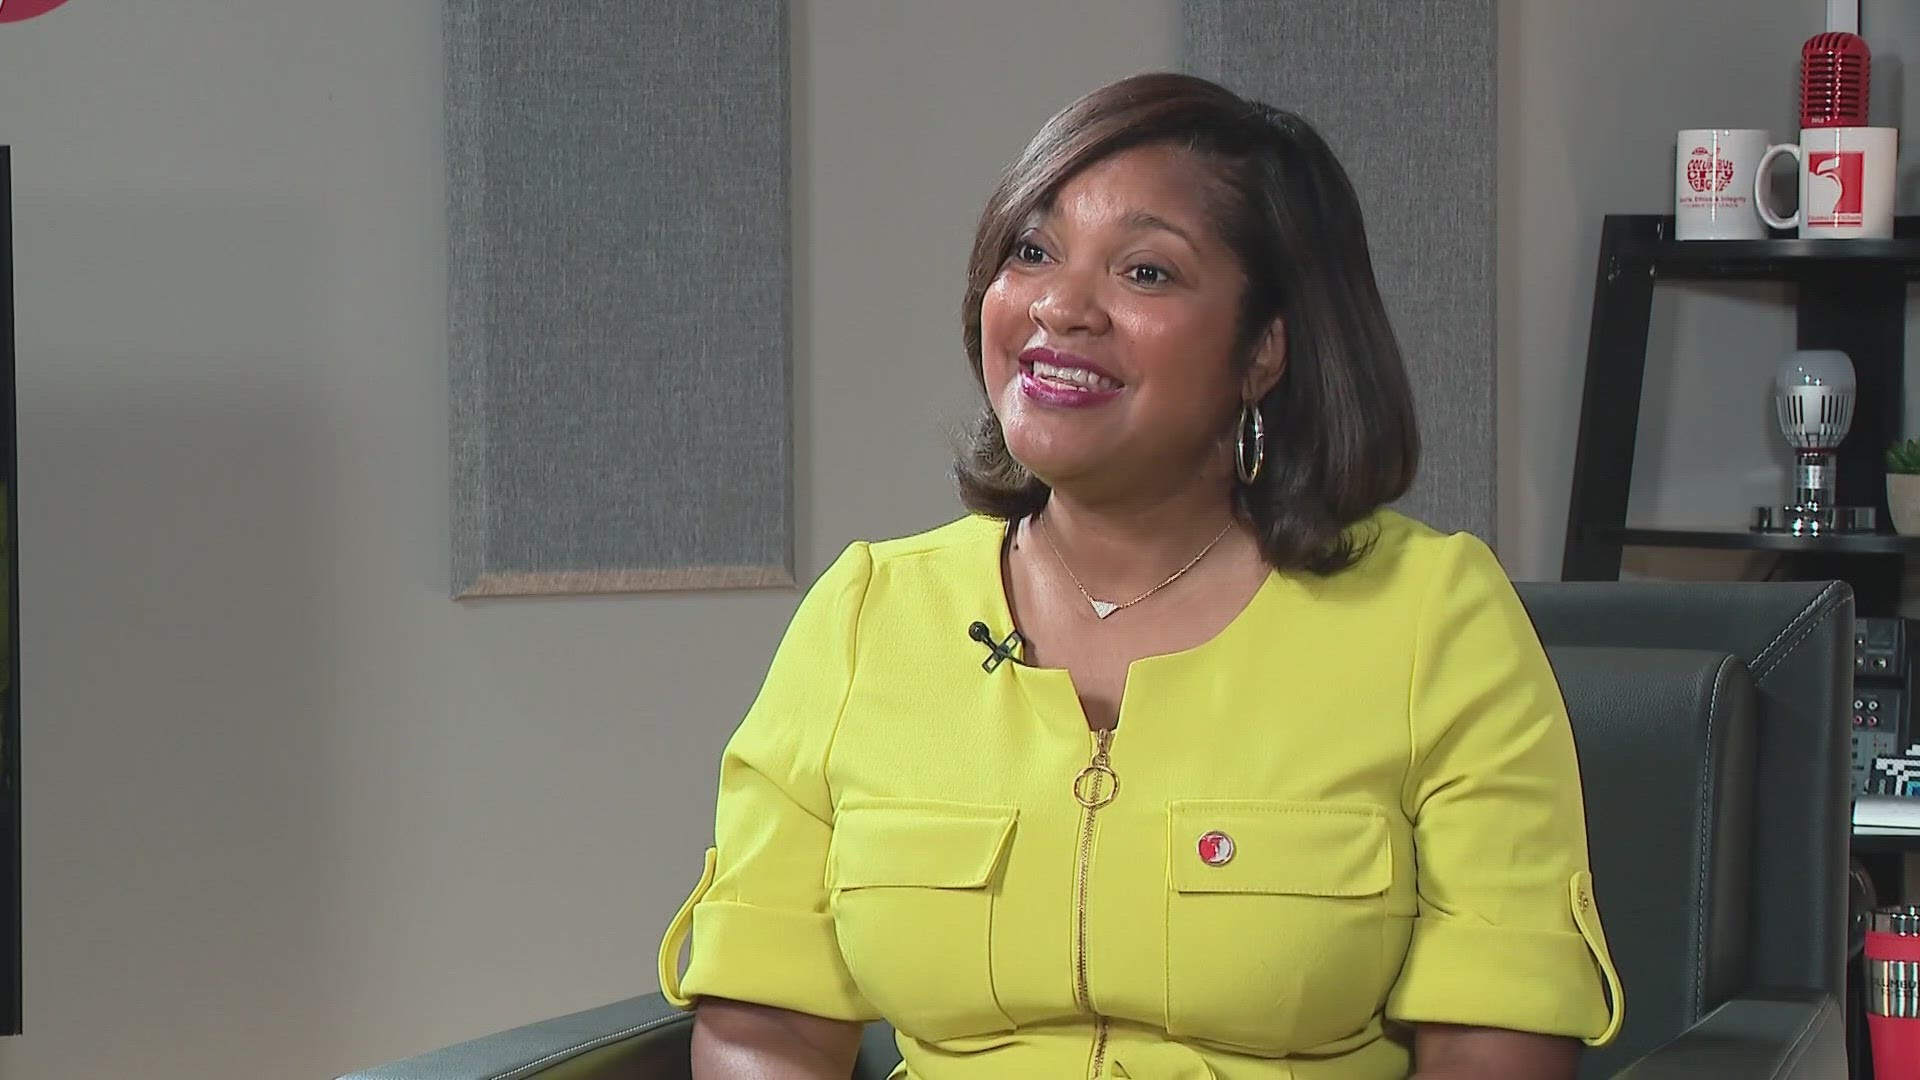 Watch Wake Up CBUS Thursday at 6 a.m. to hear what the new superintendent has in store for the coming school year.